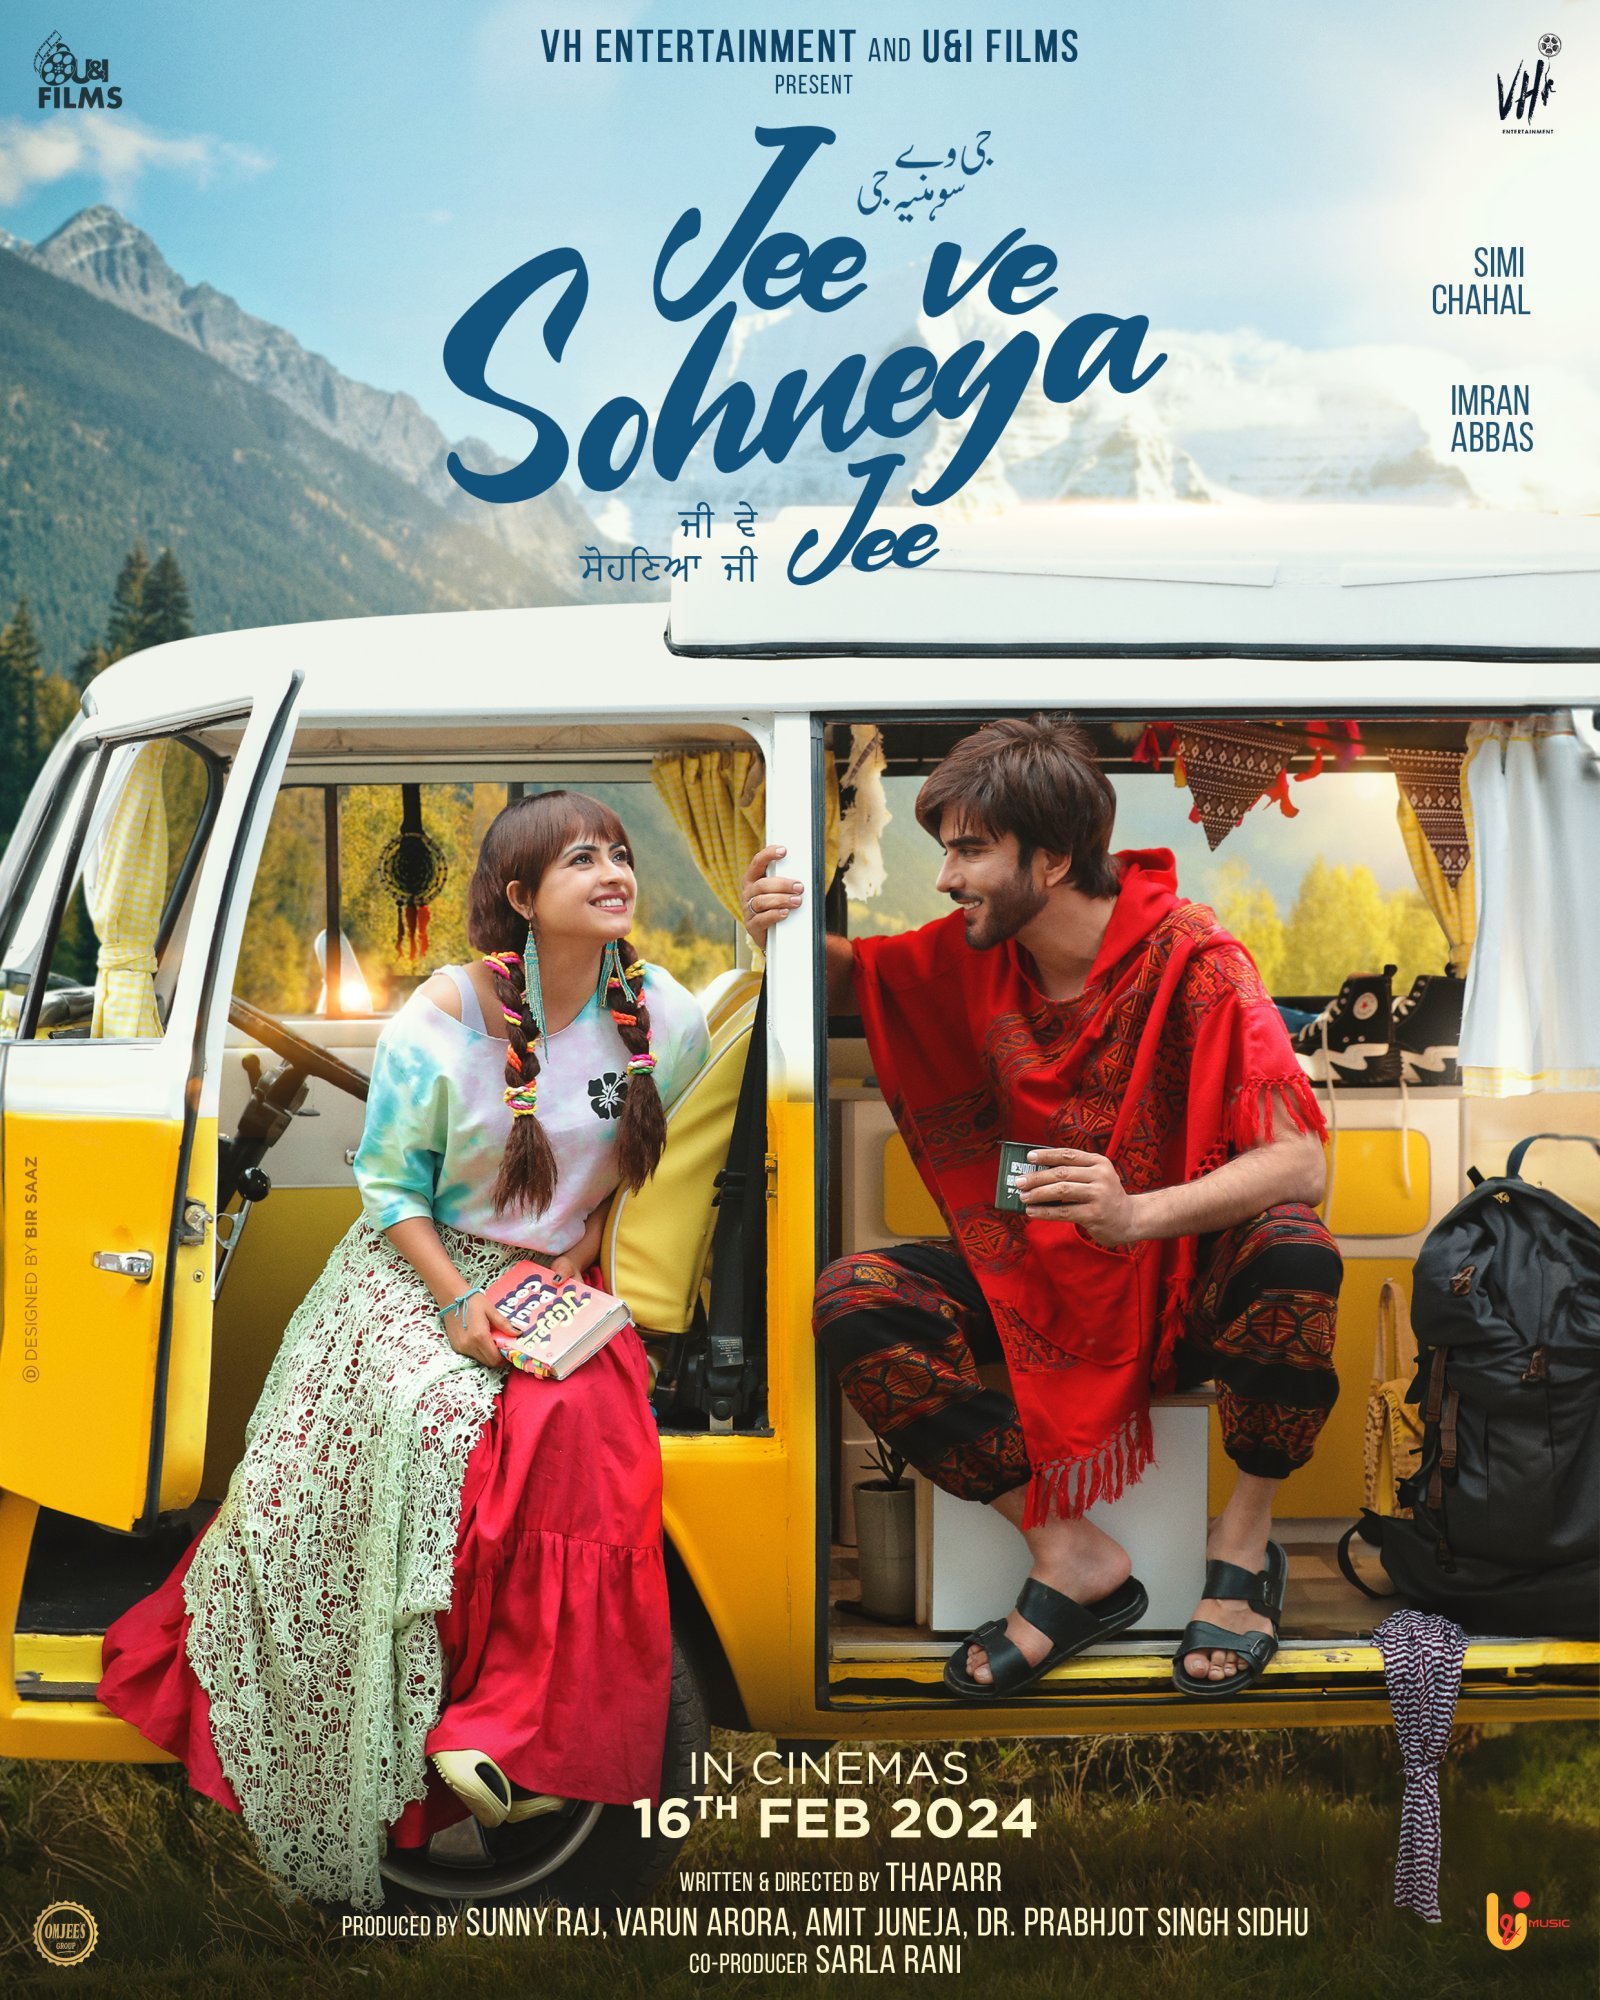 Romantic musical saga Takes Center Stage with the Poster of 'Jee Ve Sohneya Jee', The film is releasing on 16th Feb. 2024